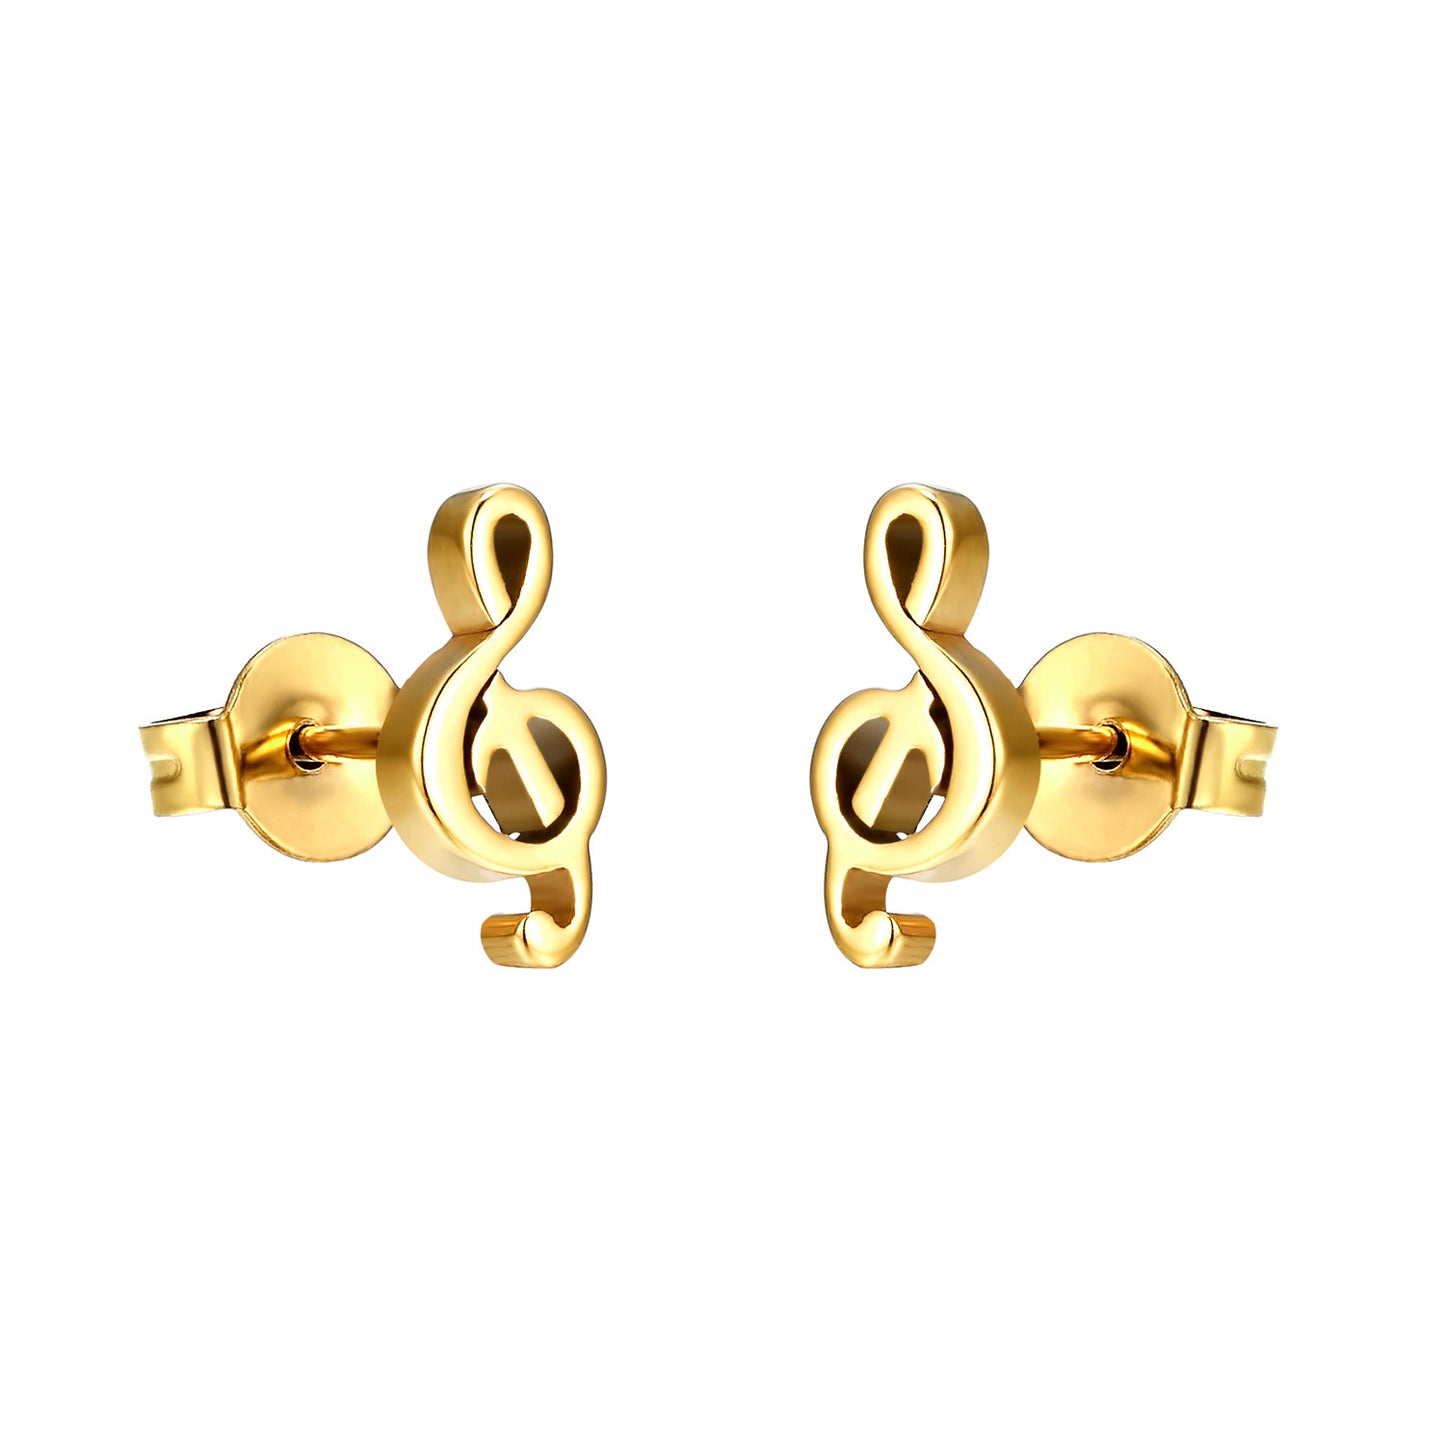 Treble Clef Musical Note Earrings Stainless Steel Studs Yellow Gold Tone